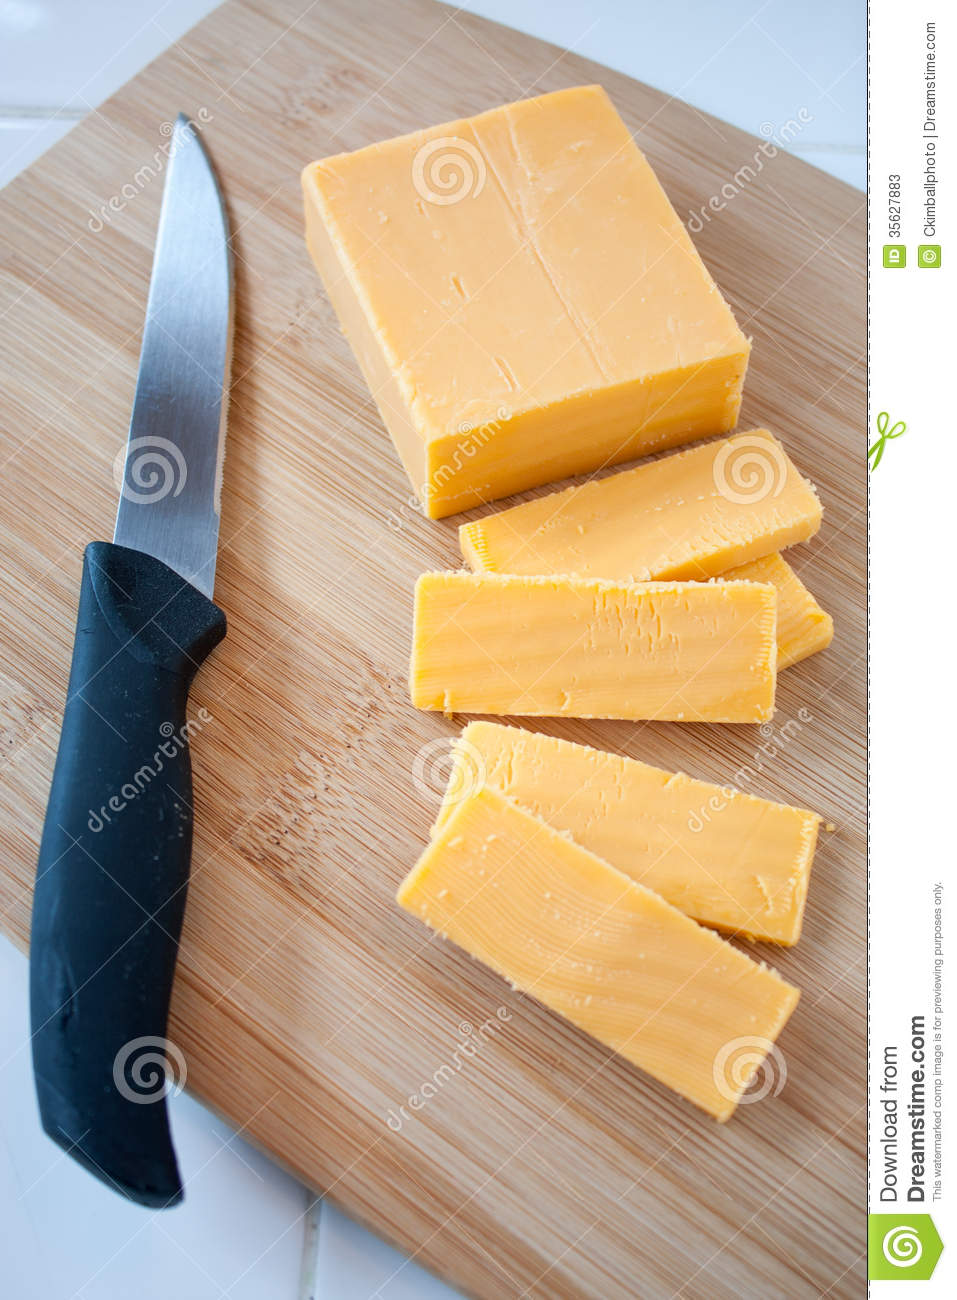 Cheddar Cheese Block And Slices Stock Image